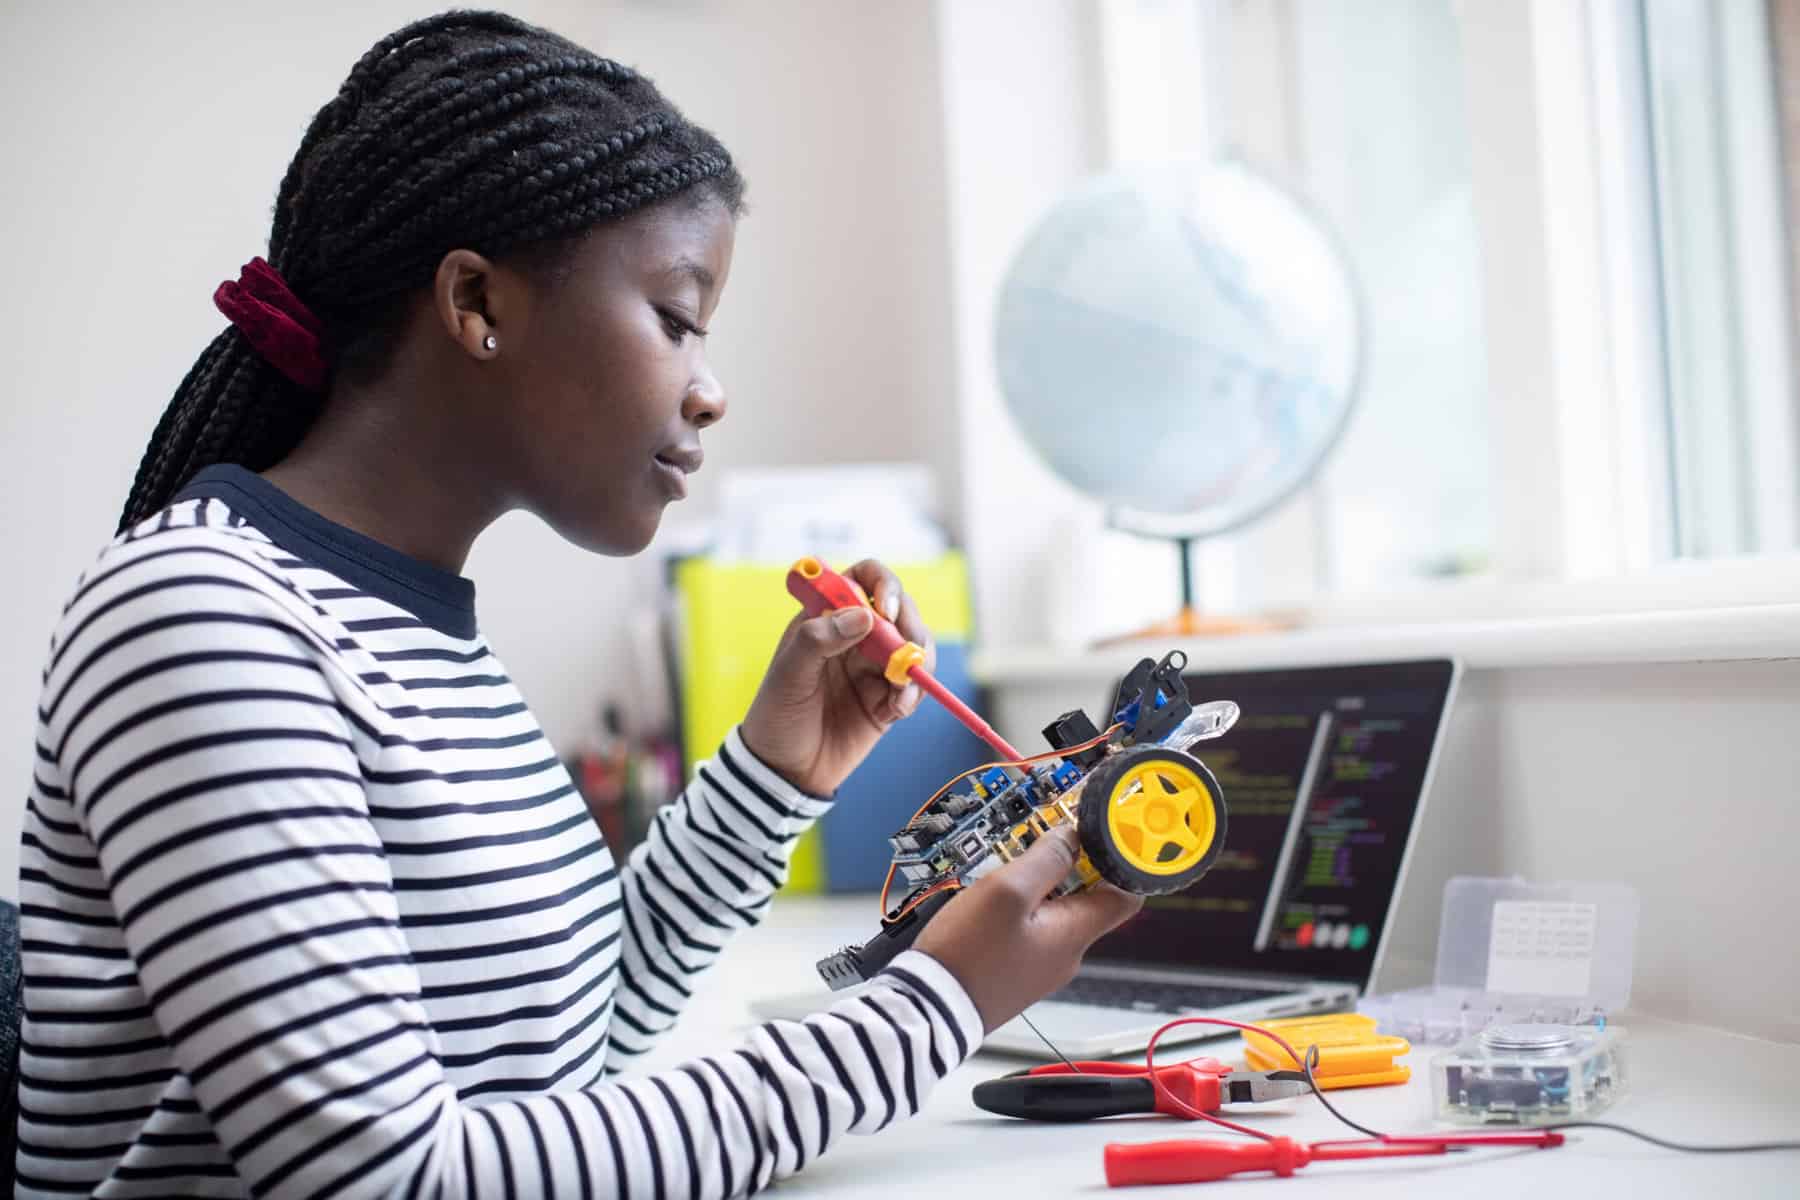 Female student building a robotic car for a science project.